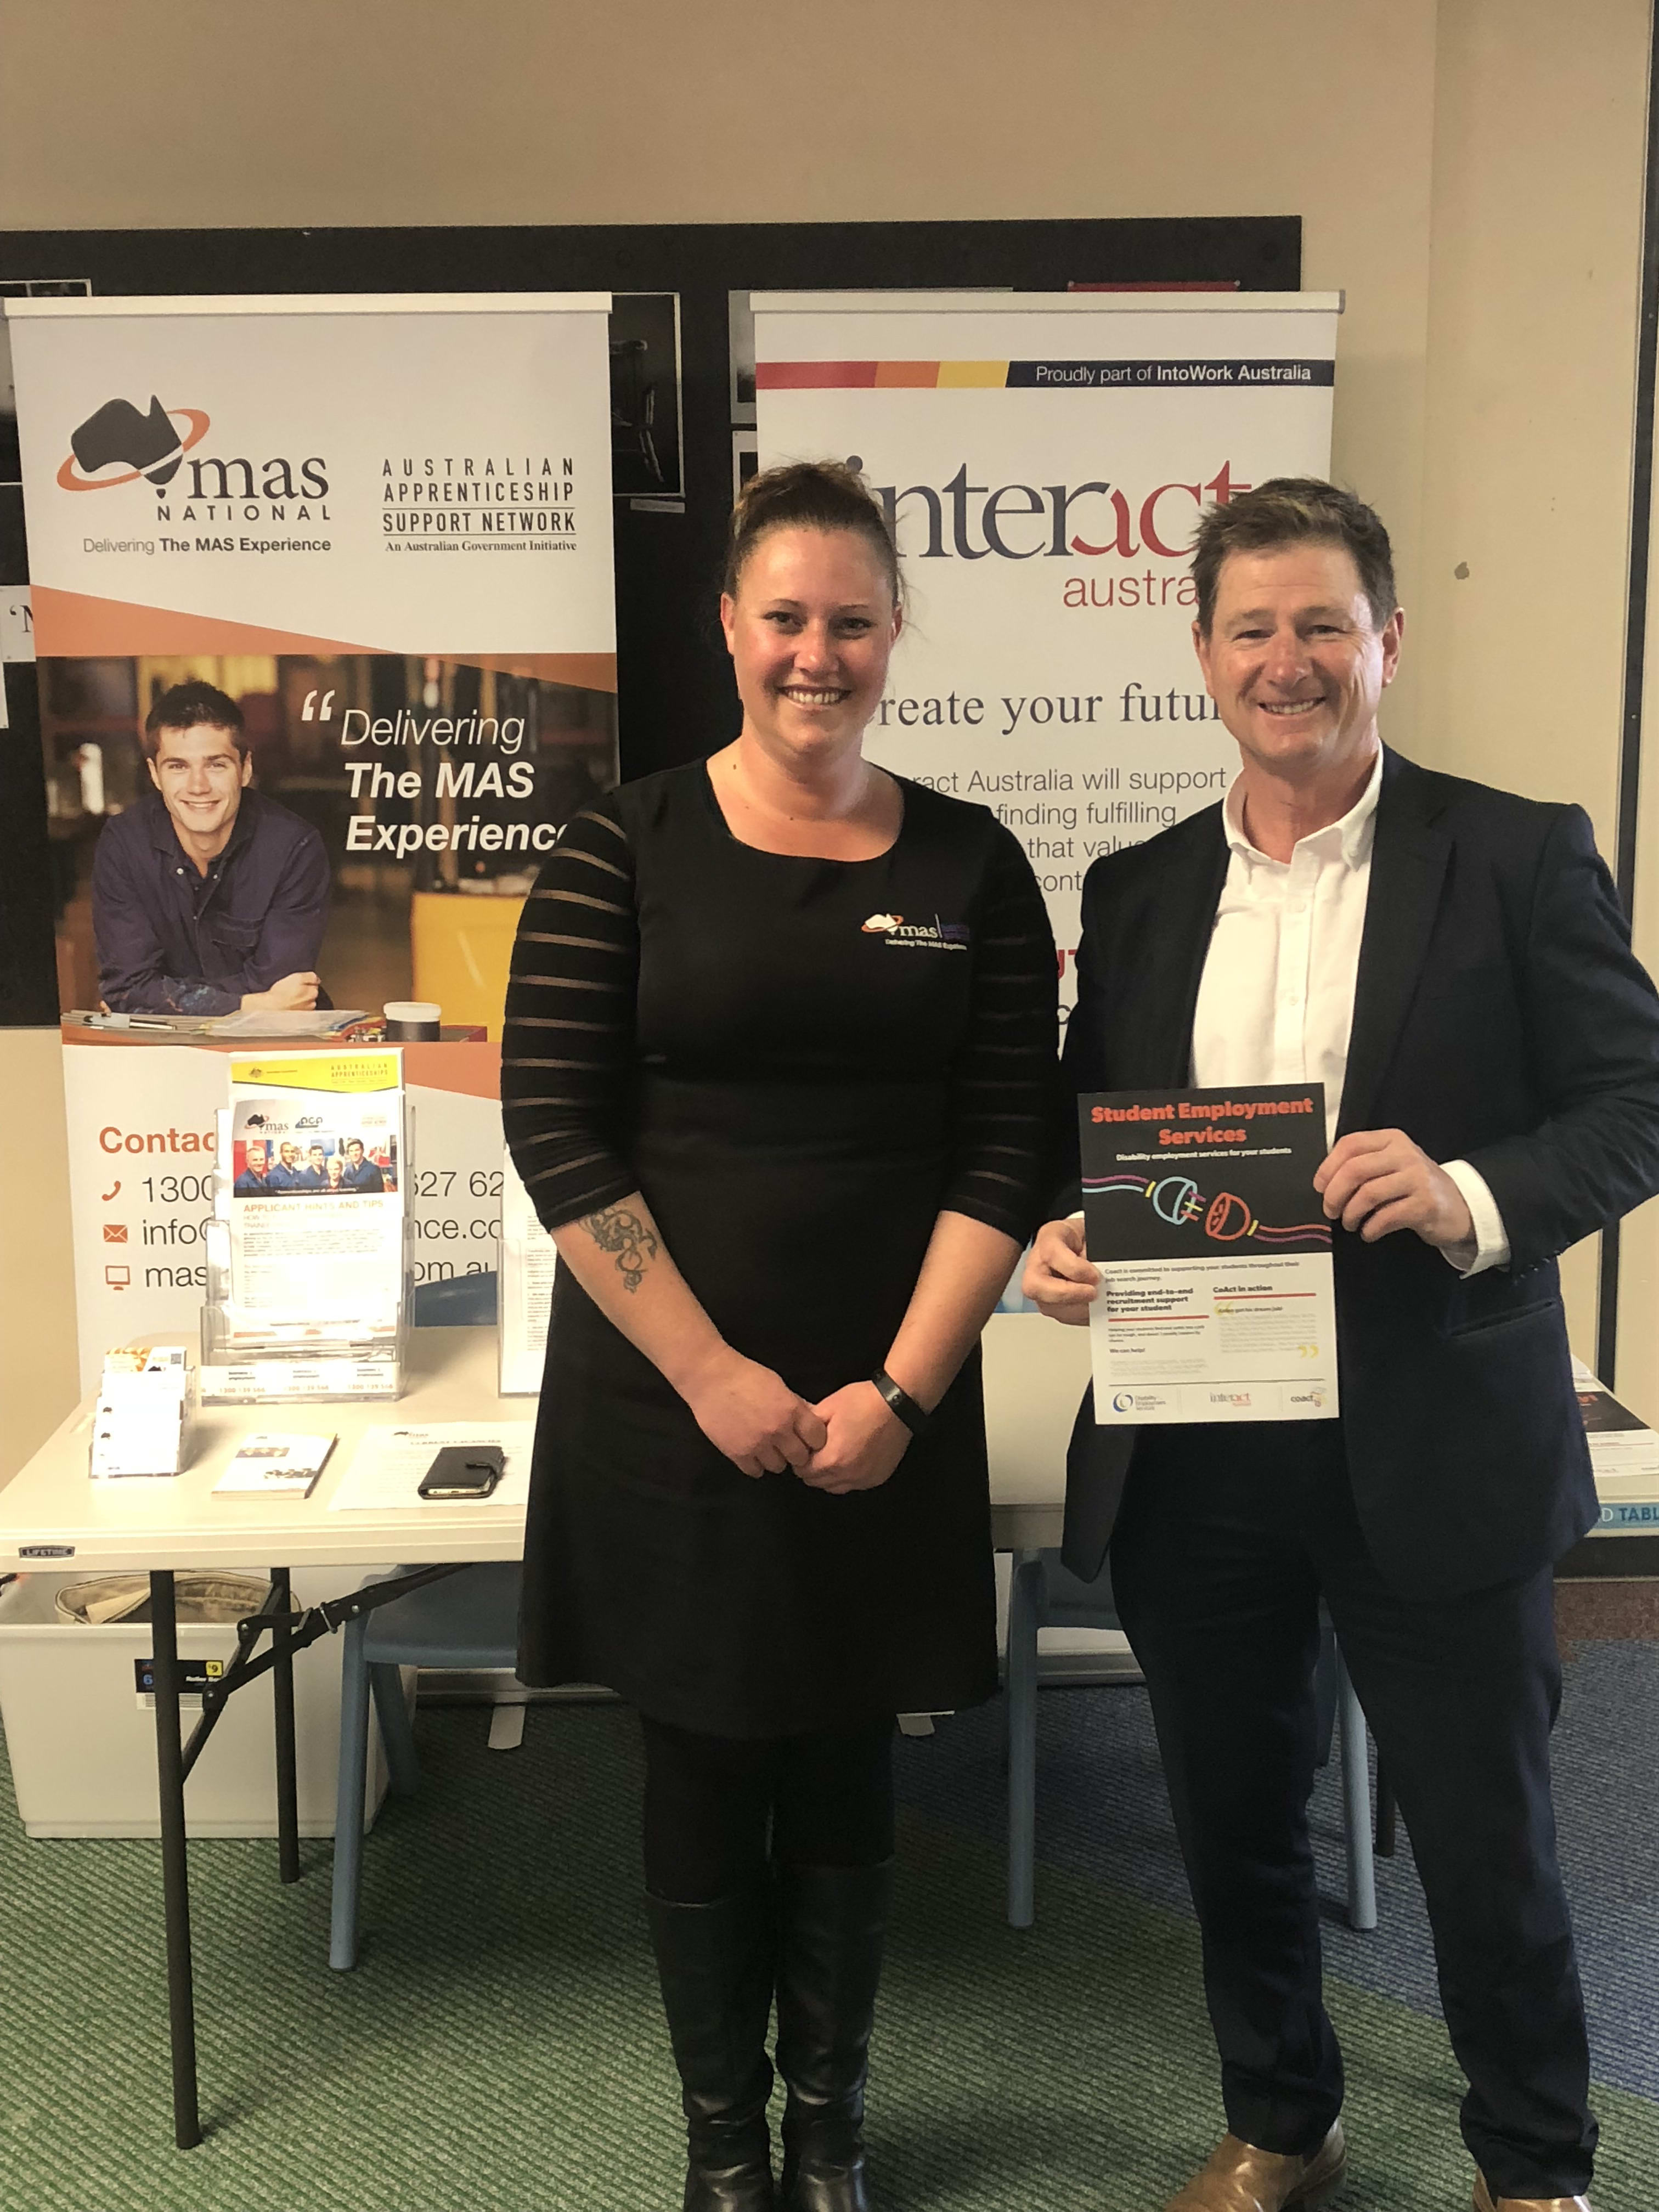 Darryn From Interact Pictured With DeArne At The Hobart College Jobs Expo